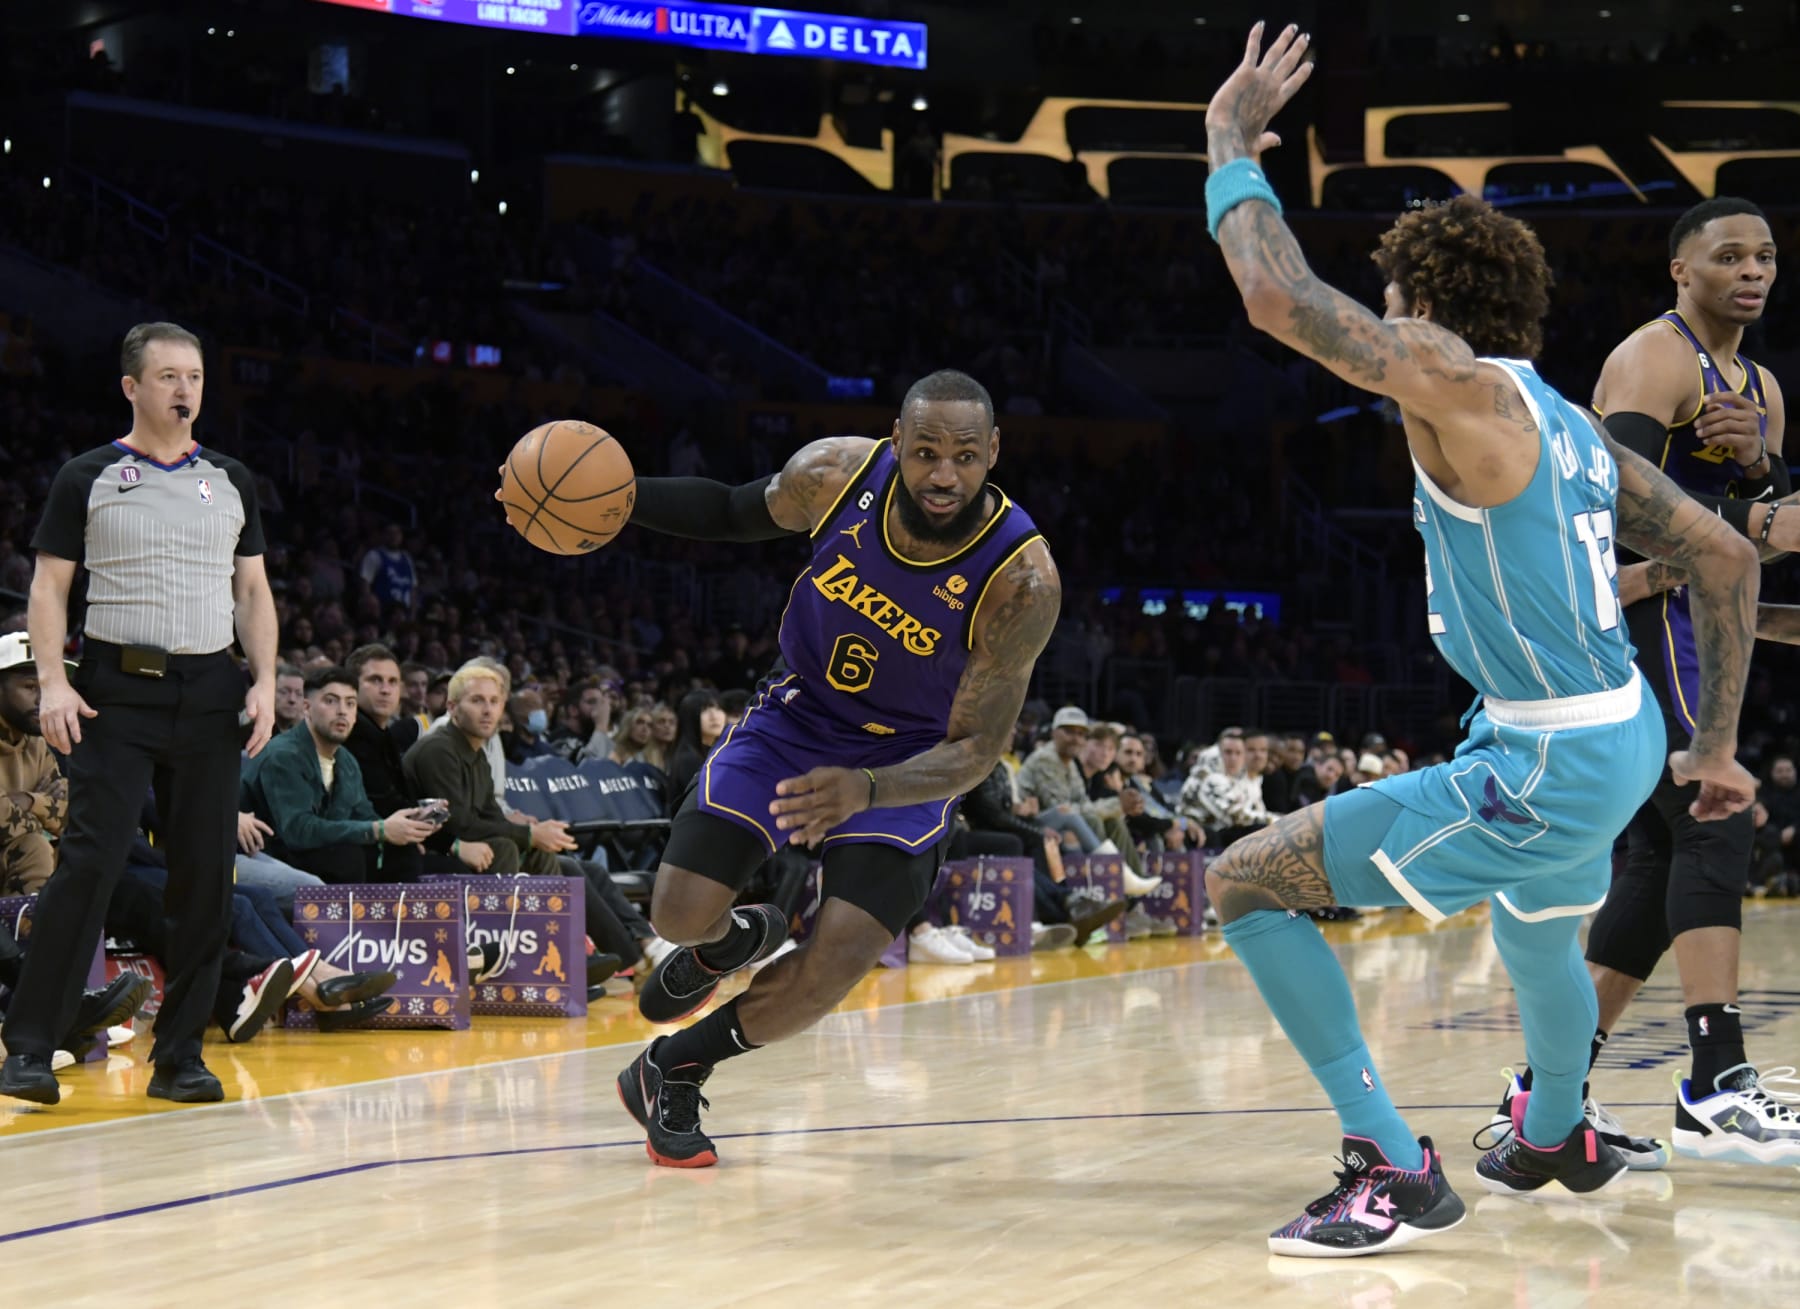 NBA Fans Clown LeBron James' Shoe Falling Off on Last Play in Lakers' Loss  to Hornets | News, Scores, Highlights, Stats, and Rumors | Bleacher Report